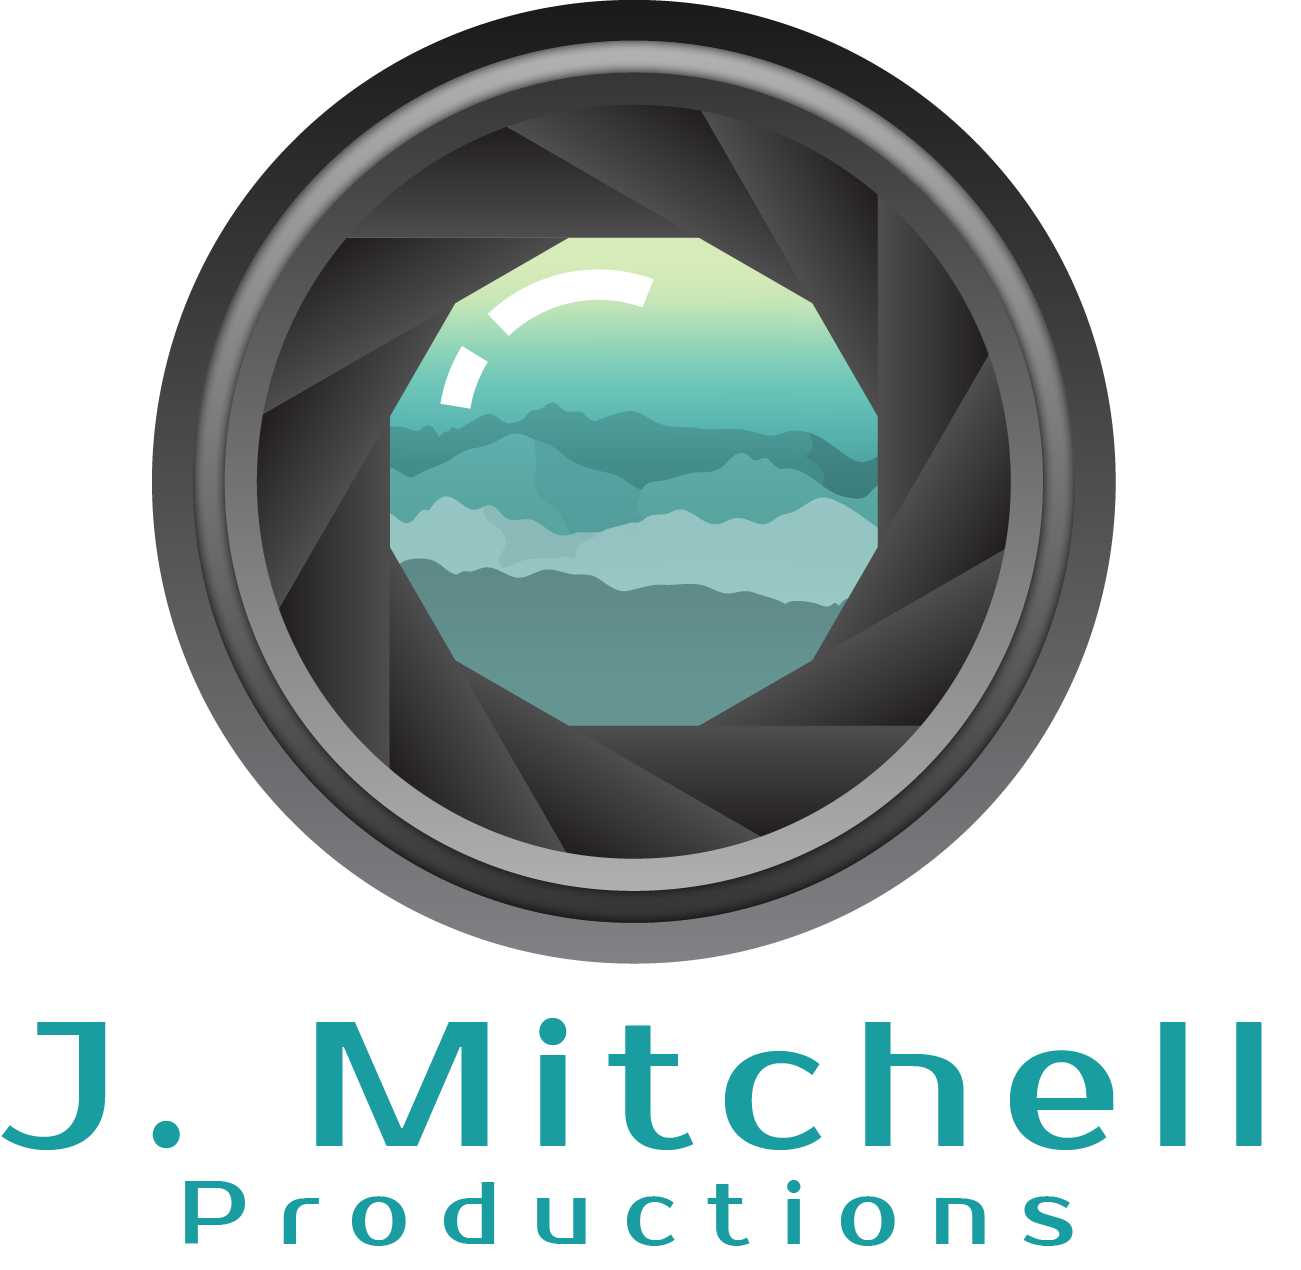 J. Mitchell Productions